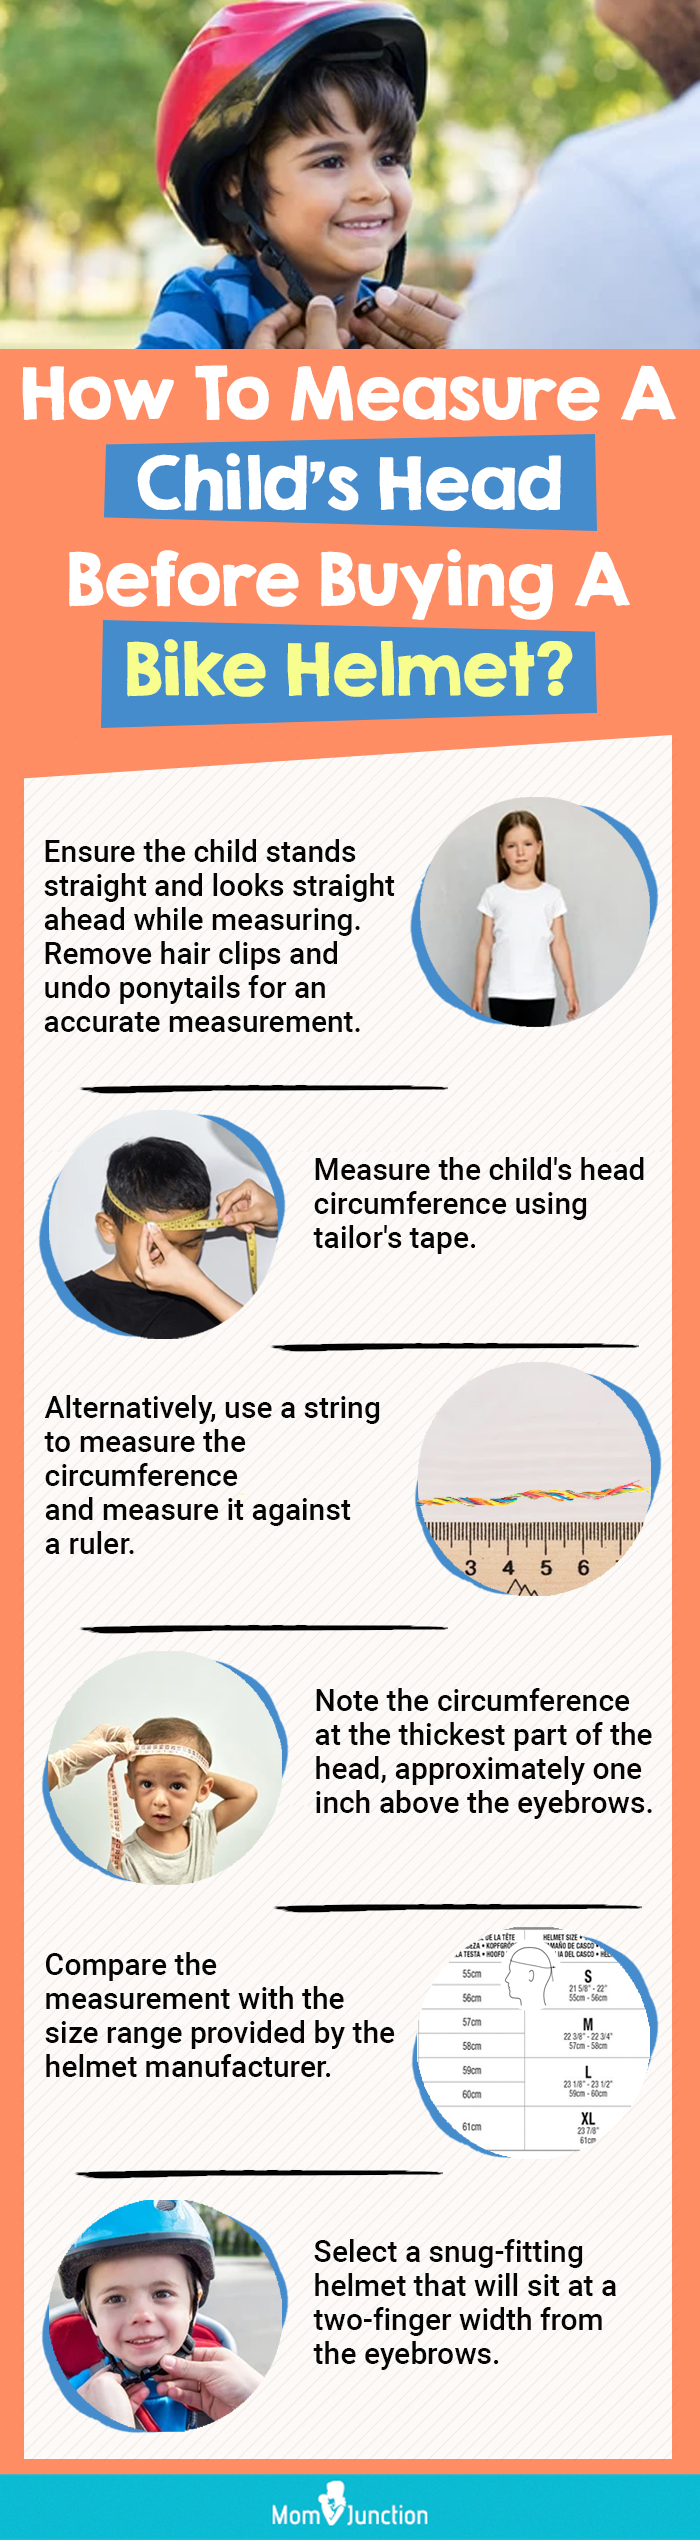 How To Measure A Child’s Head Before Buying A Bike Helmet (infographic)